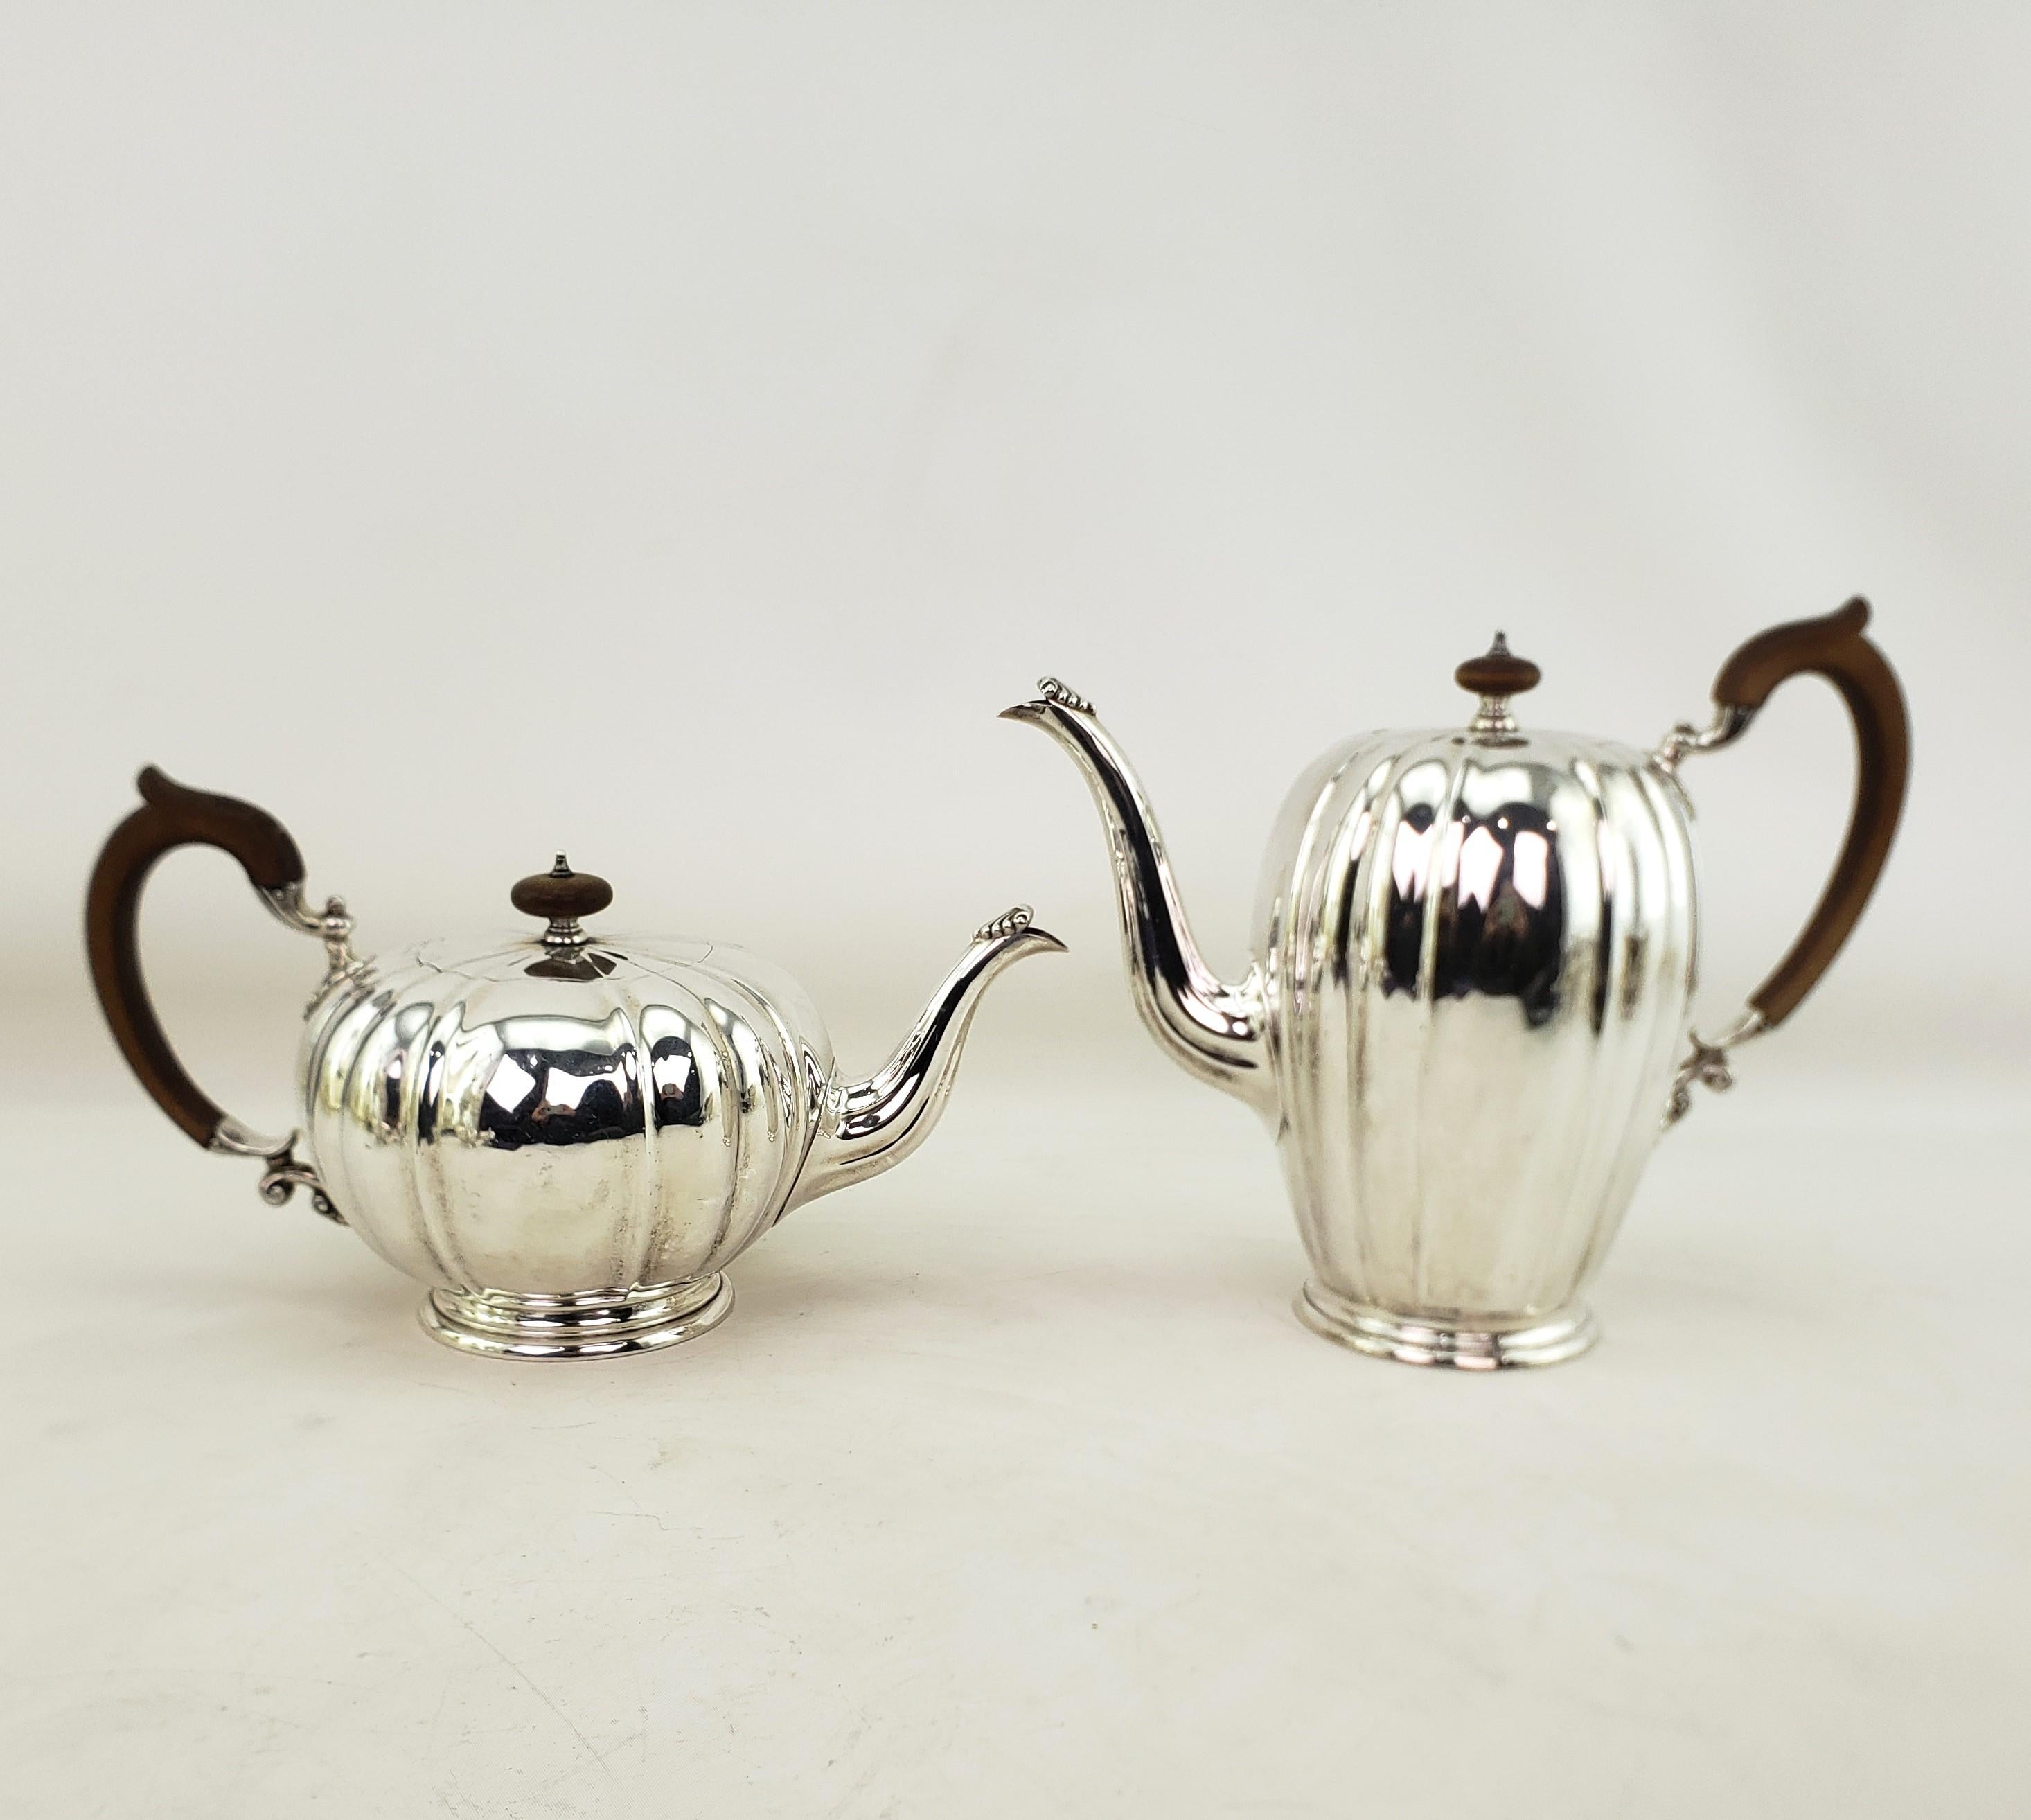 Canadian Antique Birks Sterling Silver Tea or Coffee Set with Creamer & Sugar Bowl For Sale